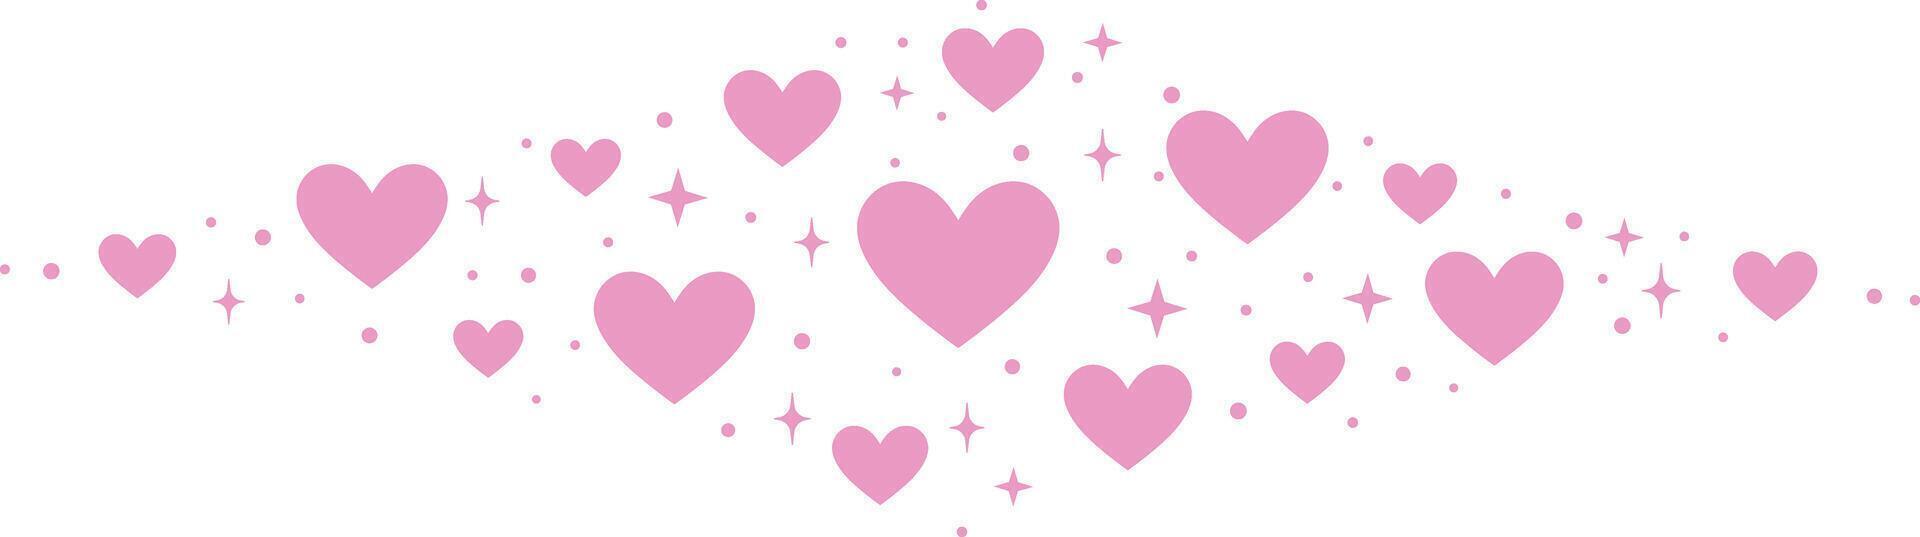 Pink heart vector banner illustration, hand drawn cute decorative clip art element with stars and hearts, isolated